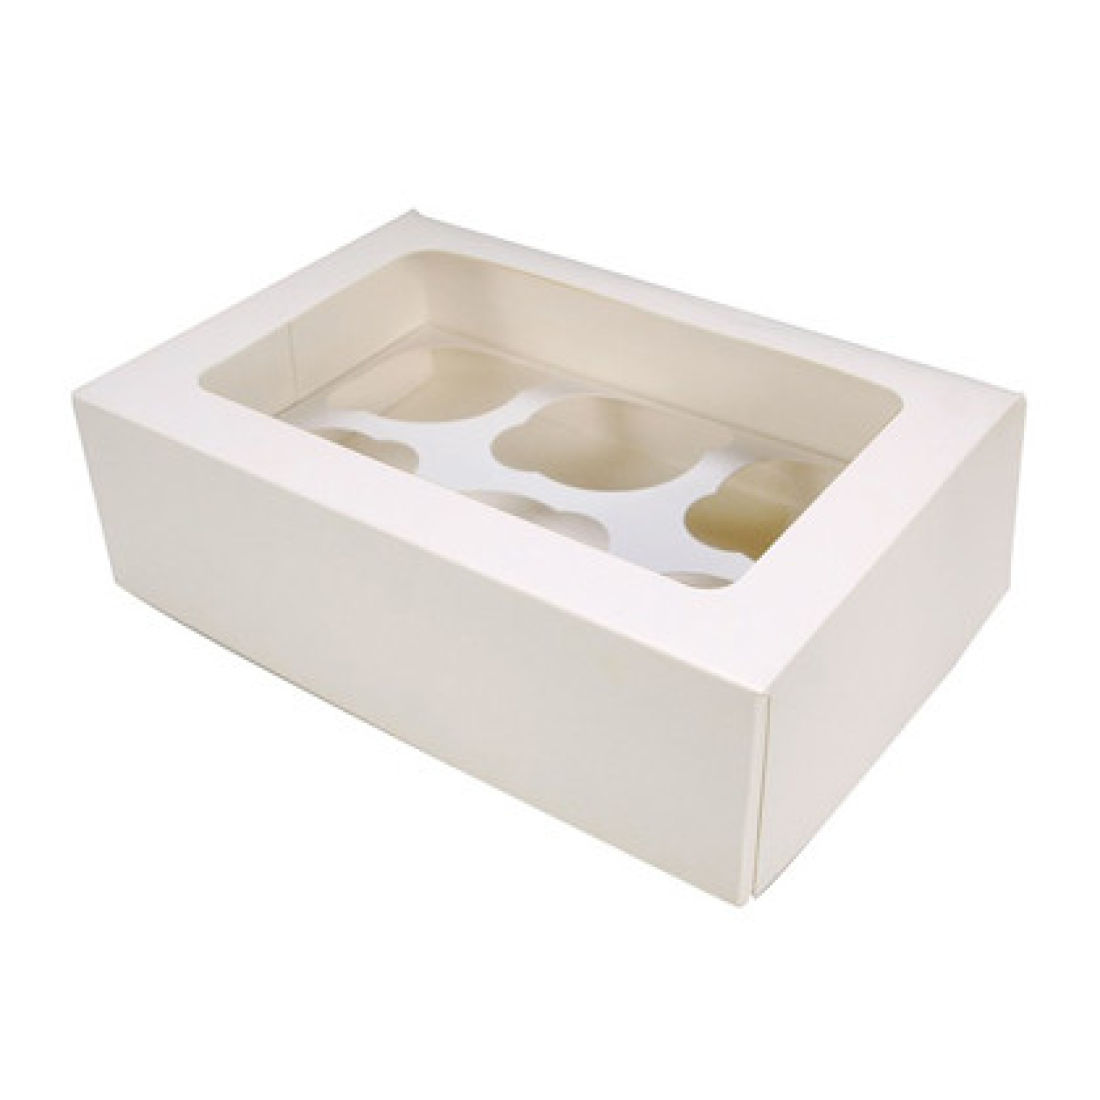 10 x White 6-Hole Cupcake/Muffin Boxes